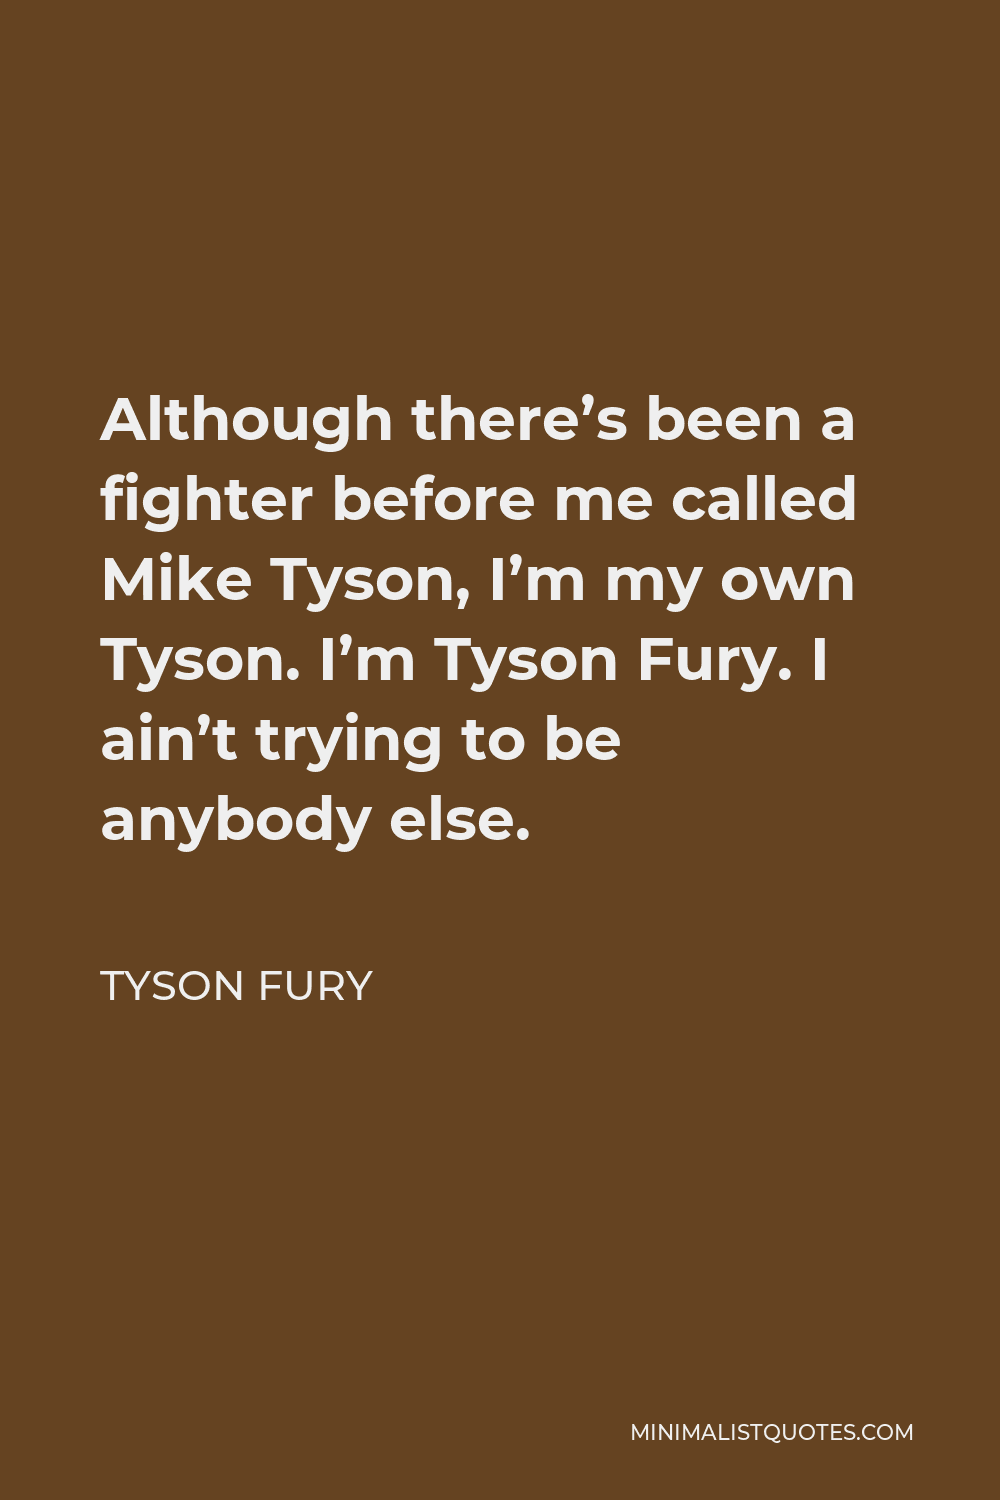 Tyson Fury Quote - Although there’s been a fighter before me called Mike Tyson, I’m my own Tyson. I’m Tyson Fury. I ain’t trying to be anybody else.